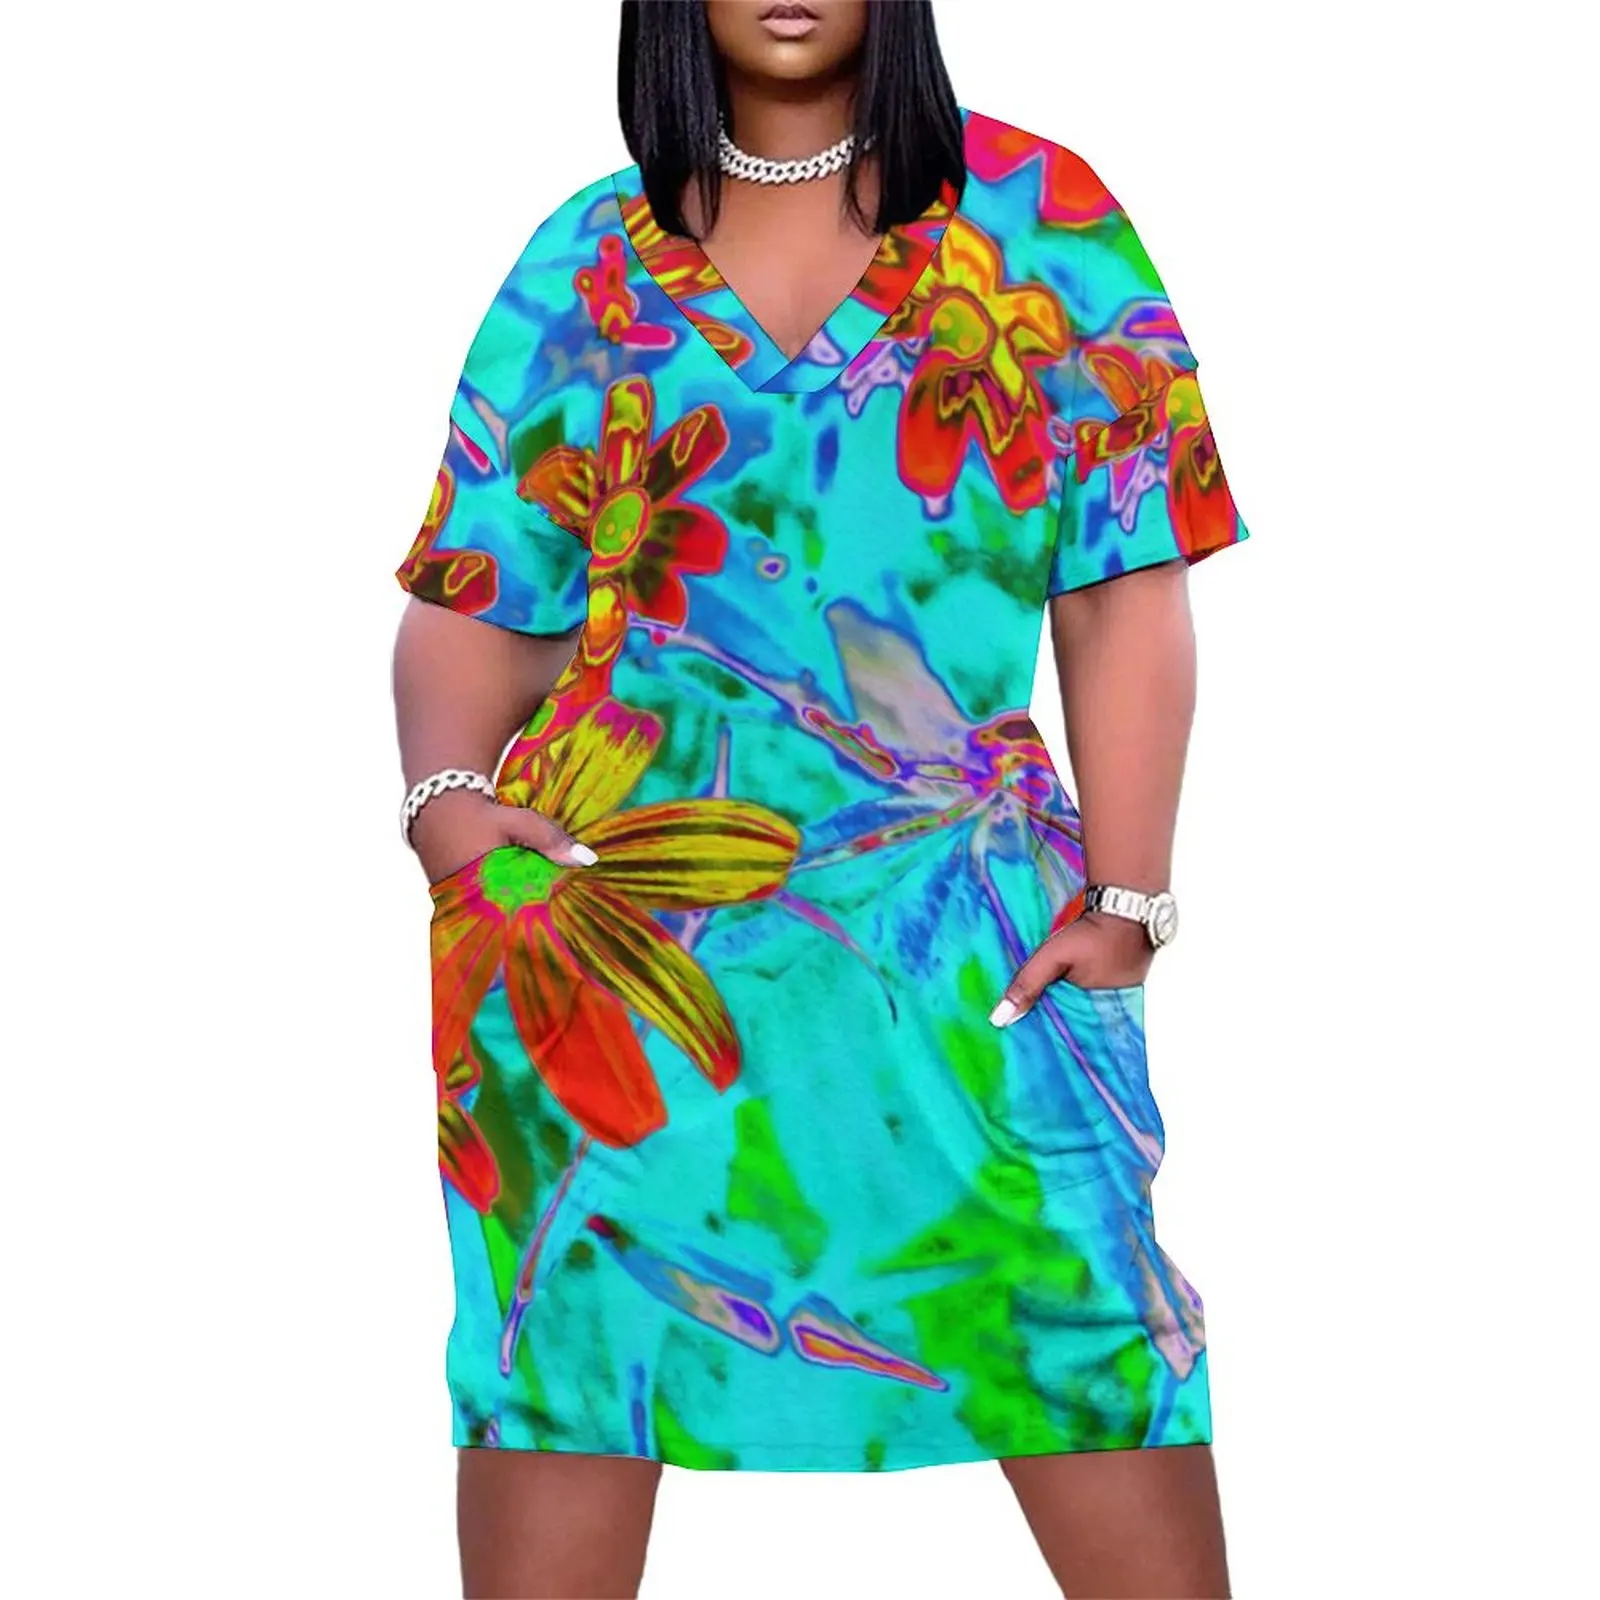 Yellow And Orange Flower Dress Plus Size Abstract Tropical Print Aesthetic Casual Dress Women V Neck Kawaii Dresses Gift Idea